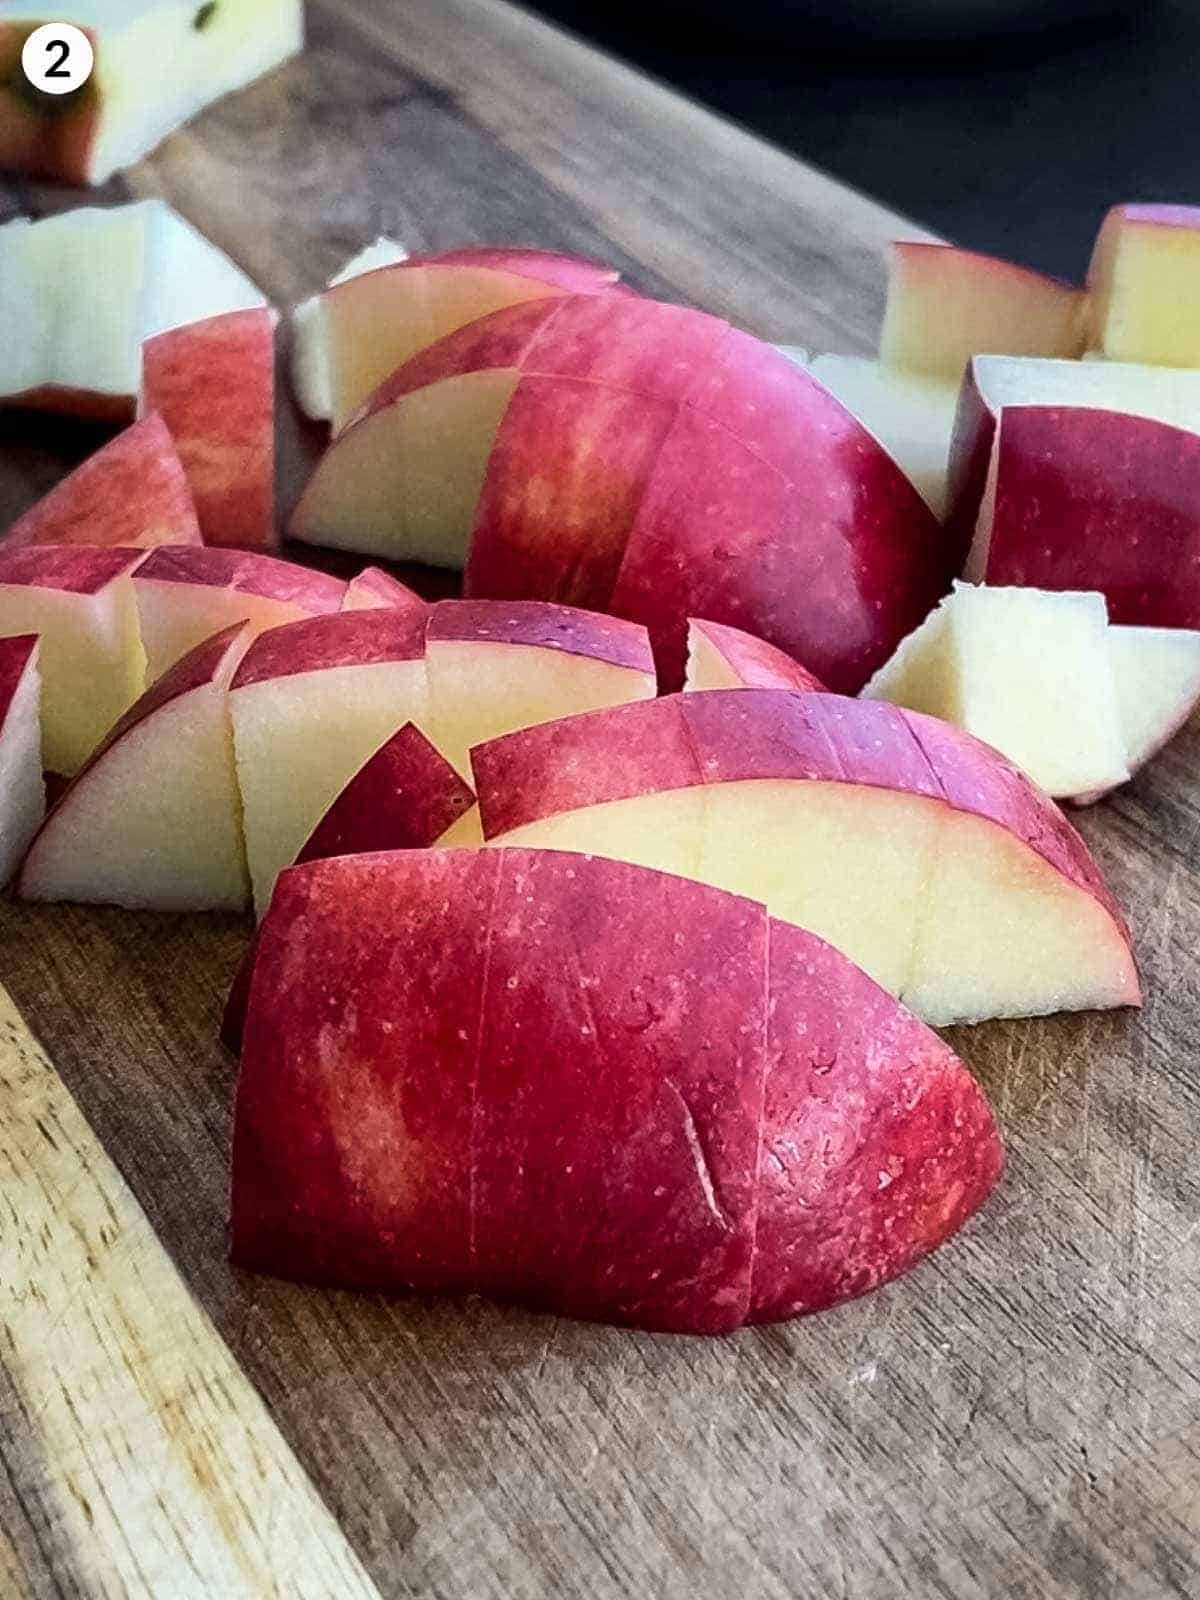 diced apple on a wooden chopping board